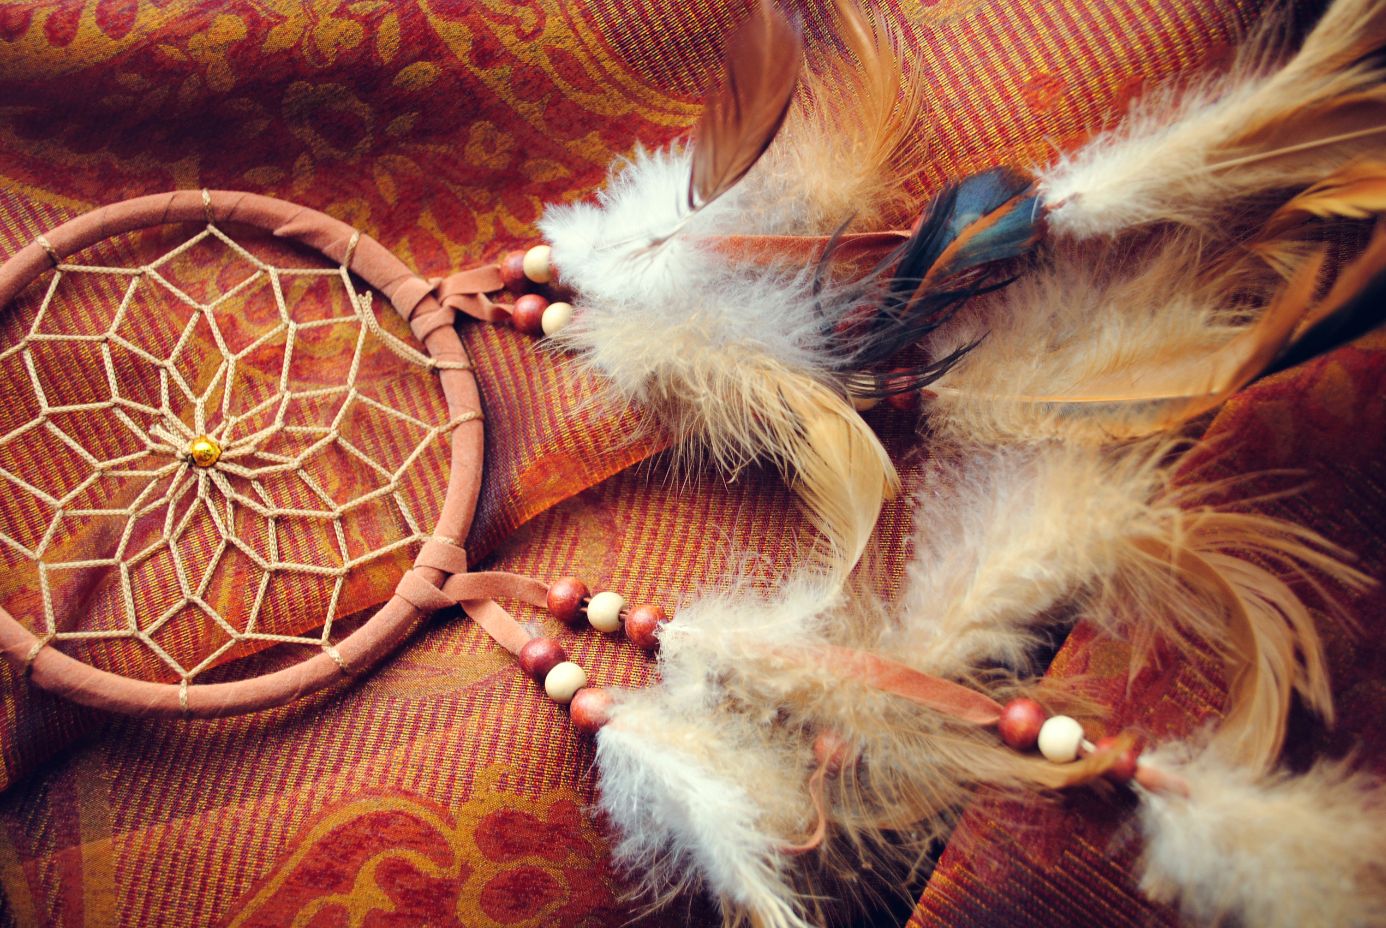 Dreamcatcher - Meaning, Benefits & How to Make a Dreamcatcher